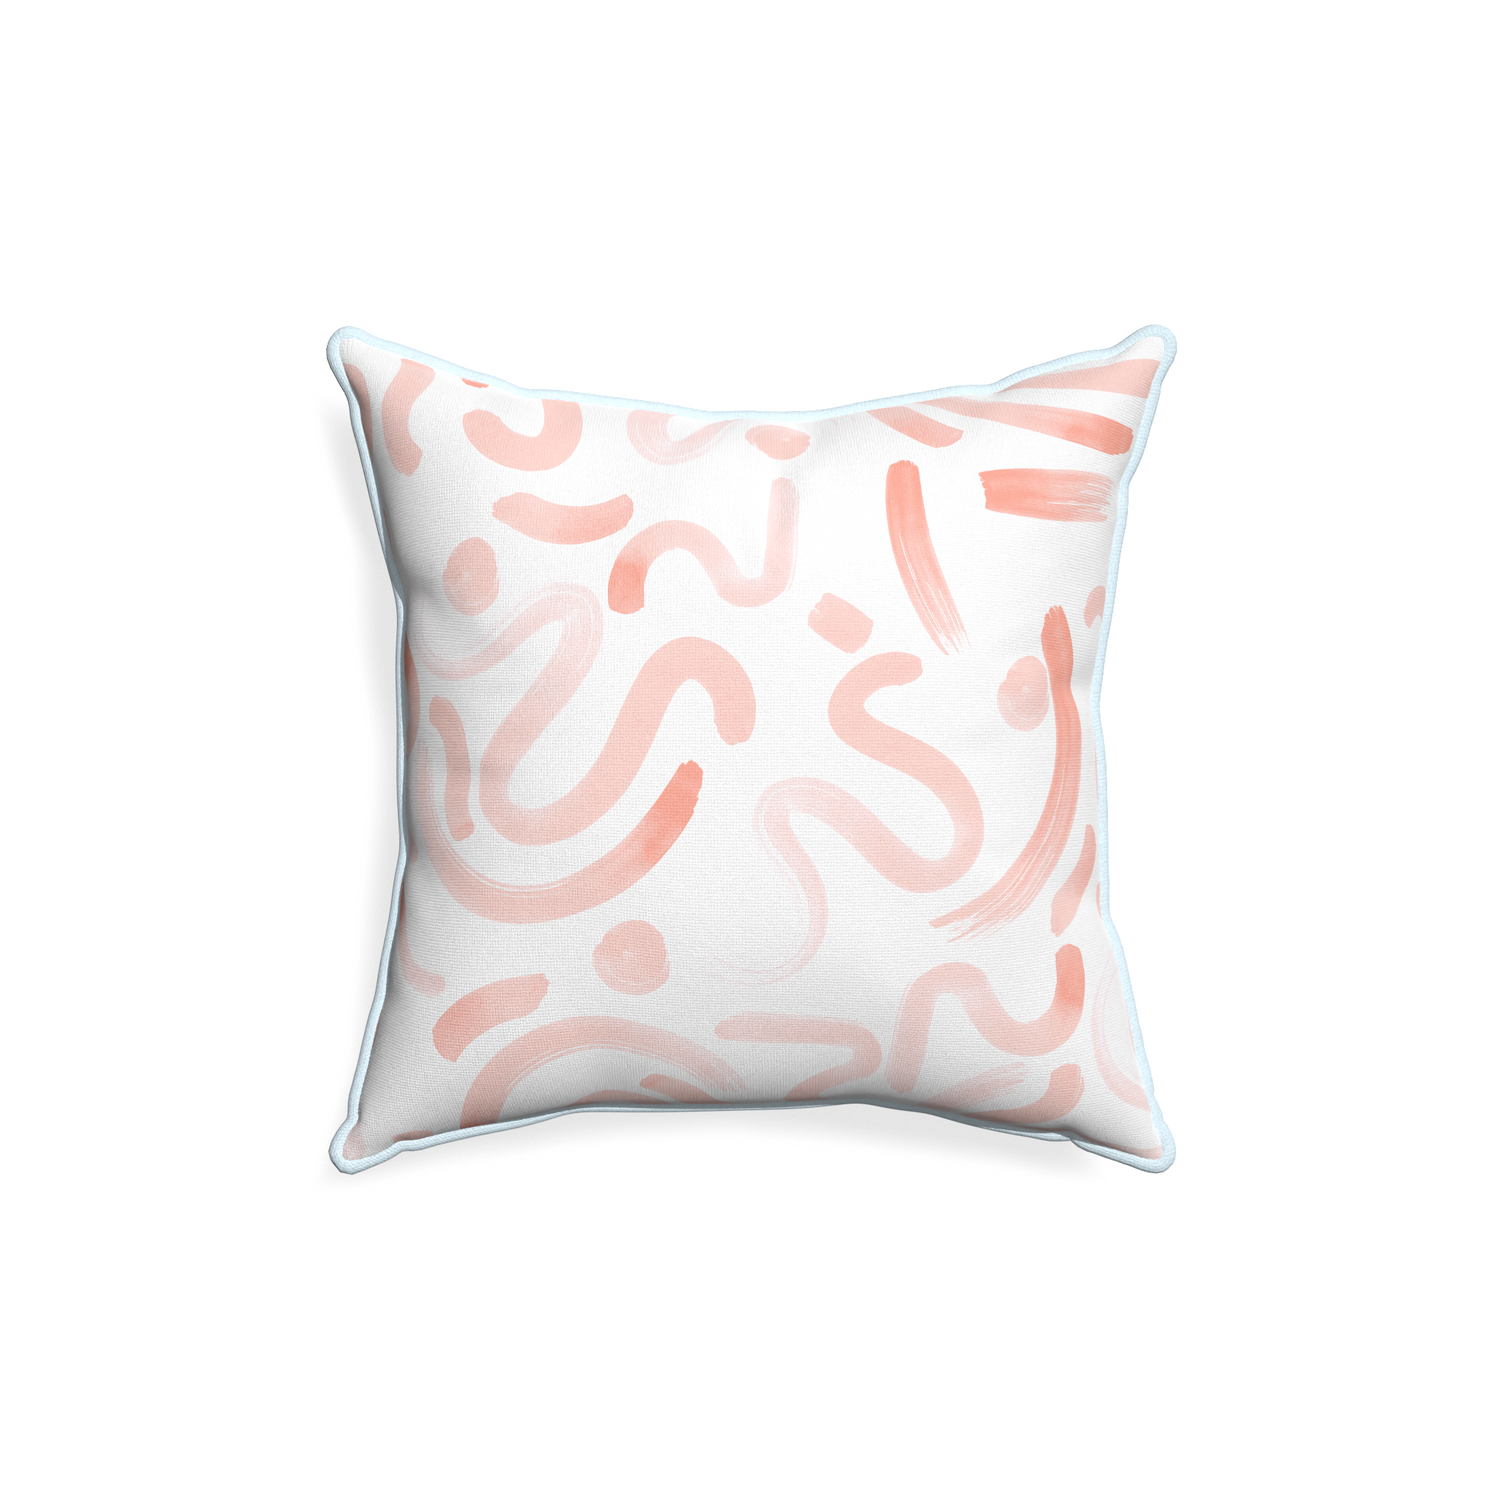 18-square hockney pink custom pink graphicpillow with powder piping on white background